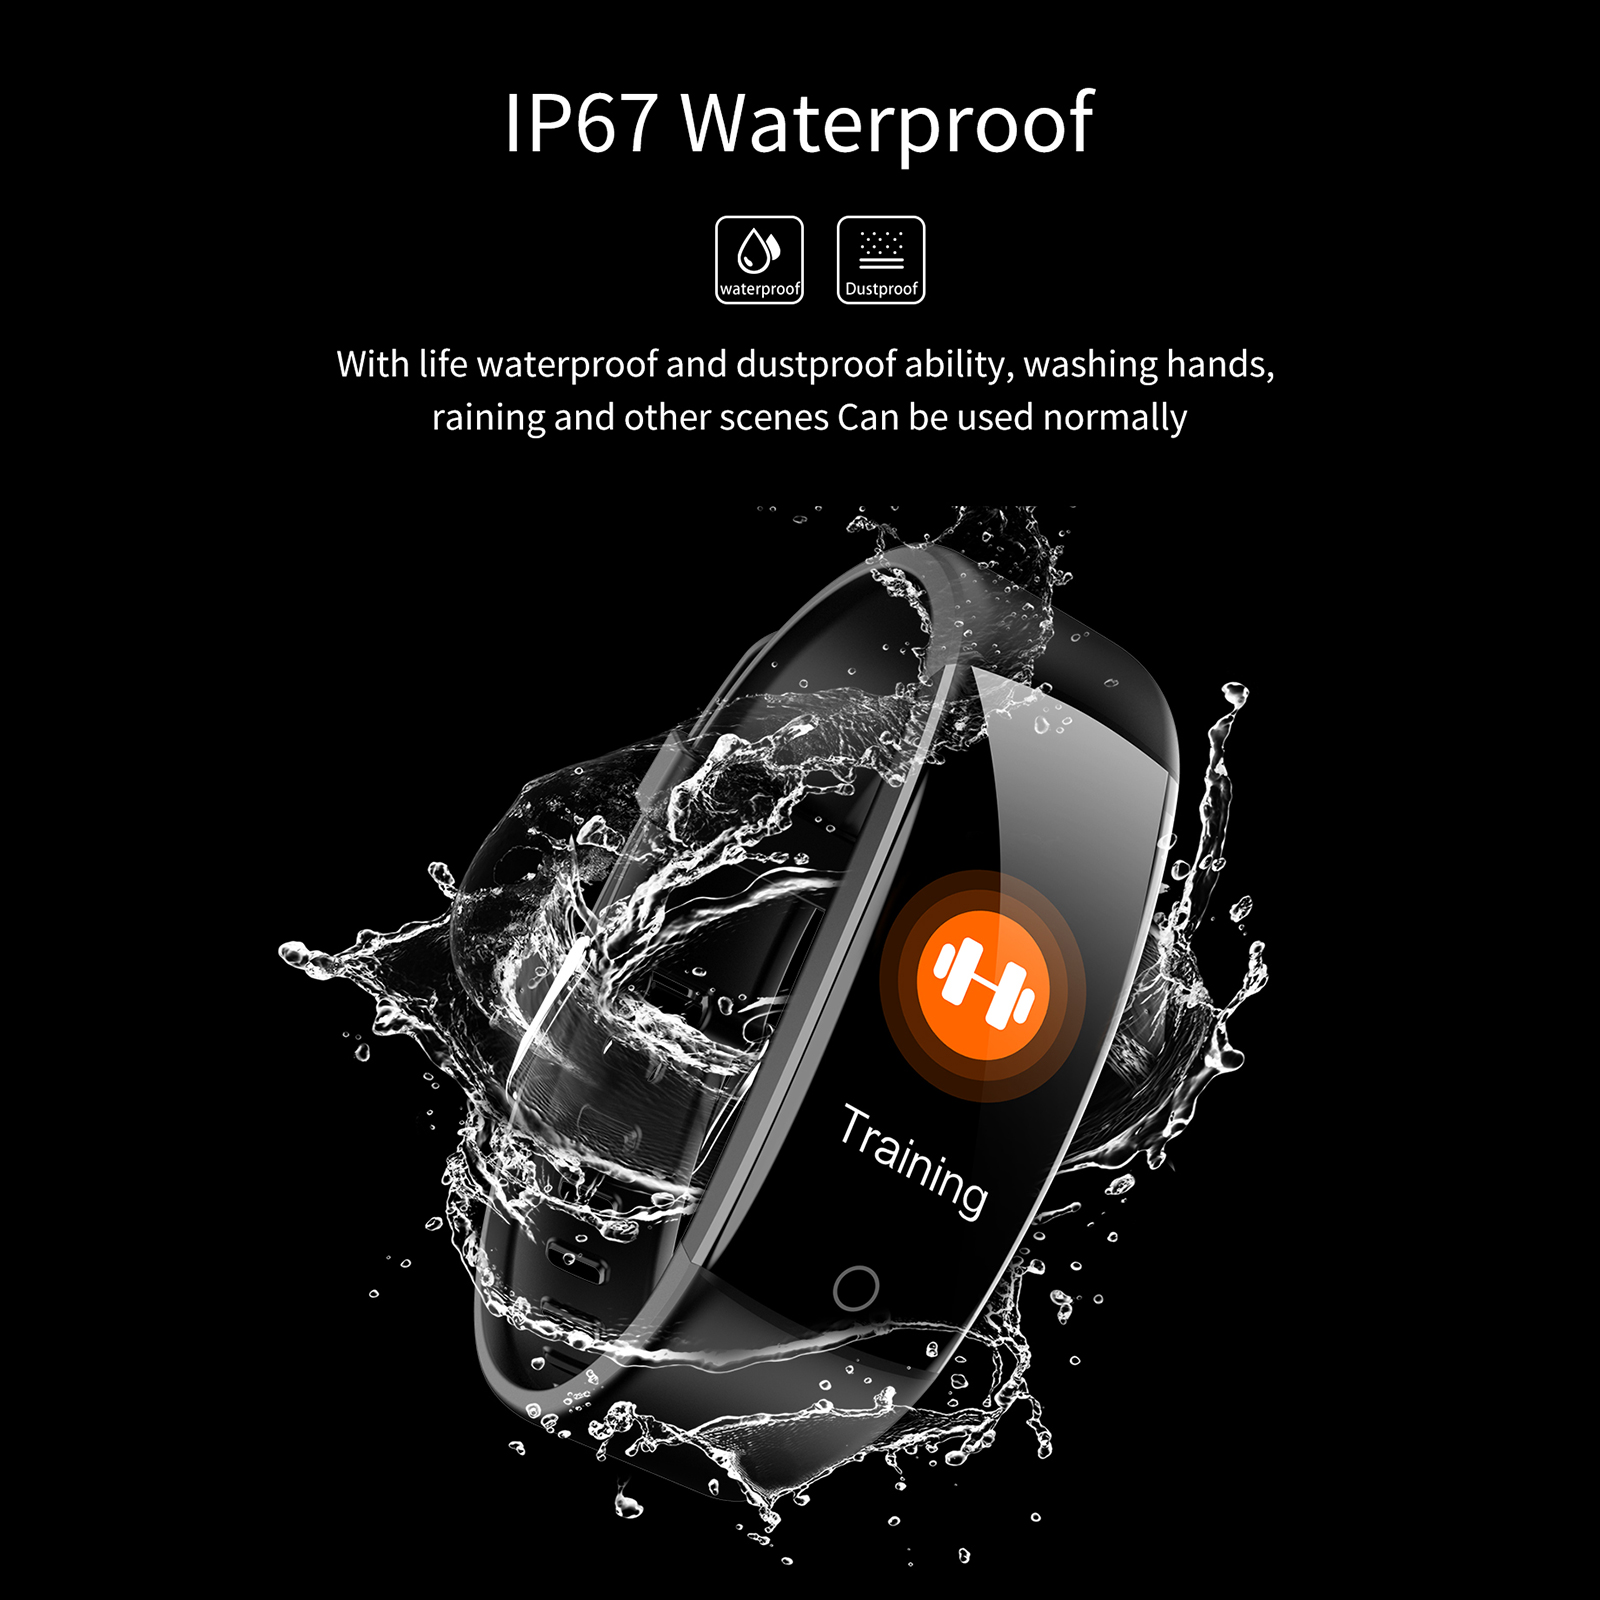 AGPTEK Waterproof Fitness Tracker with Heart Rate Monitor, Activity Monitor Smart Wristband for IOS Android Smartphone - image 3 of 8